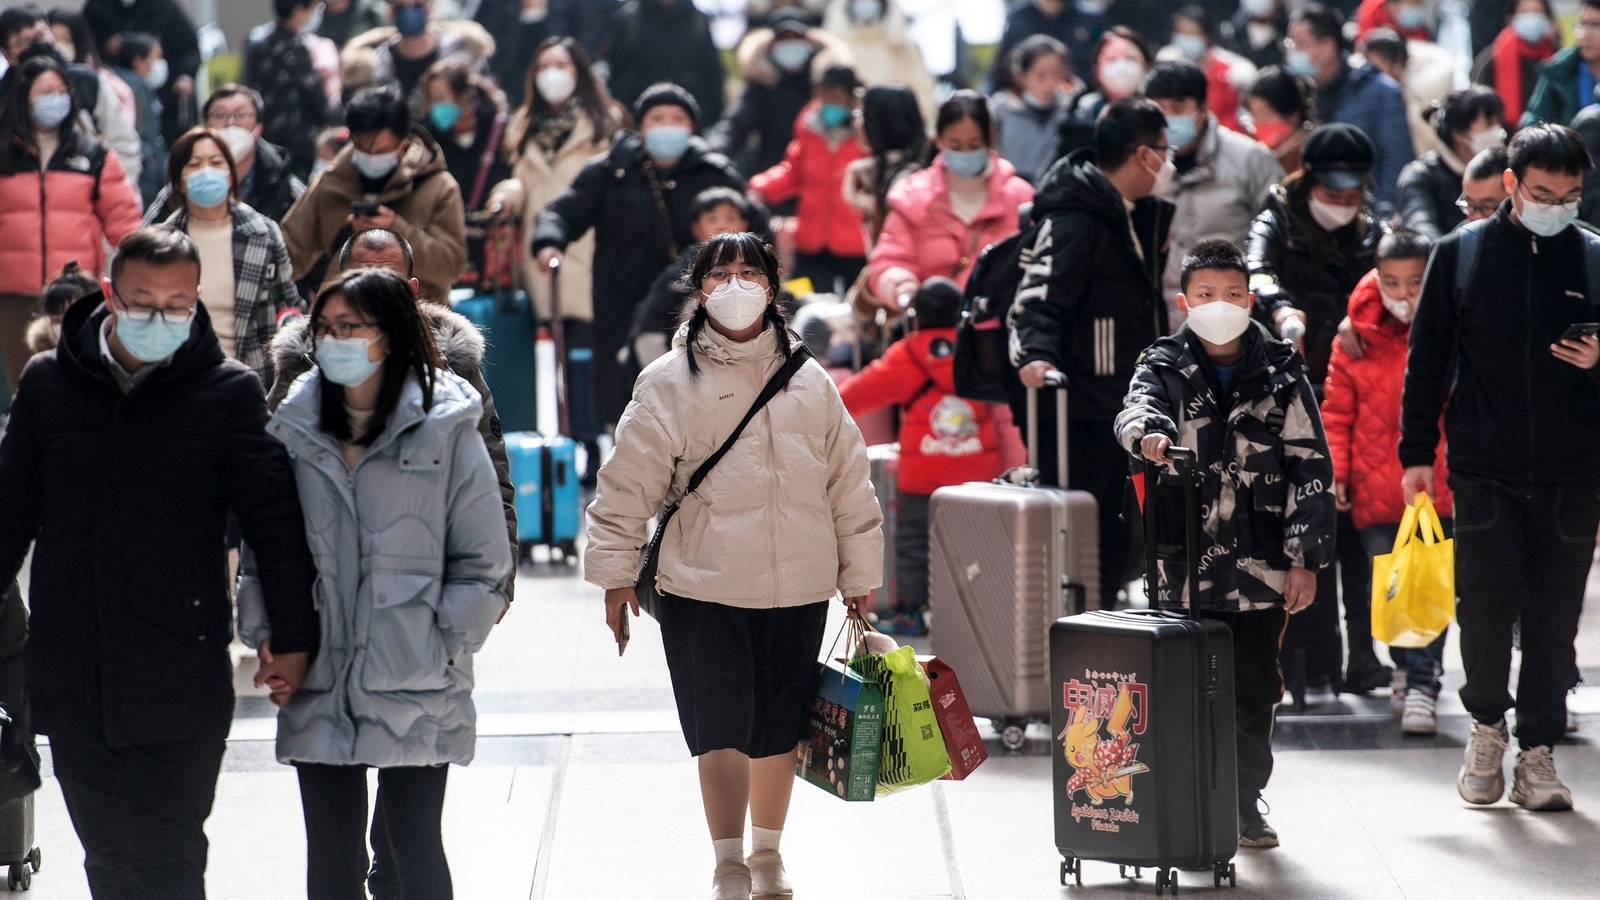 After no Covid rules in place, China sees 74% surge in Lunar New Year trips